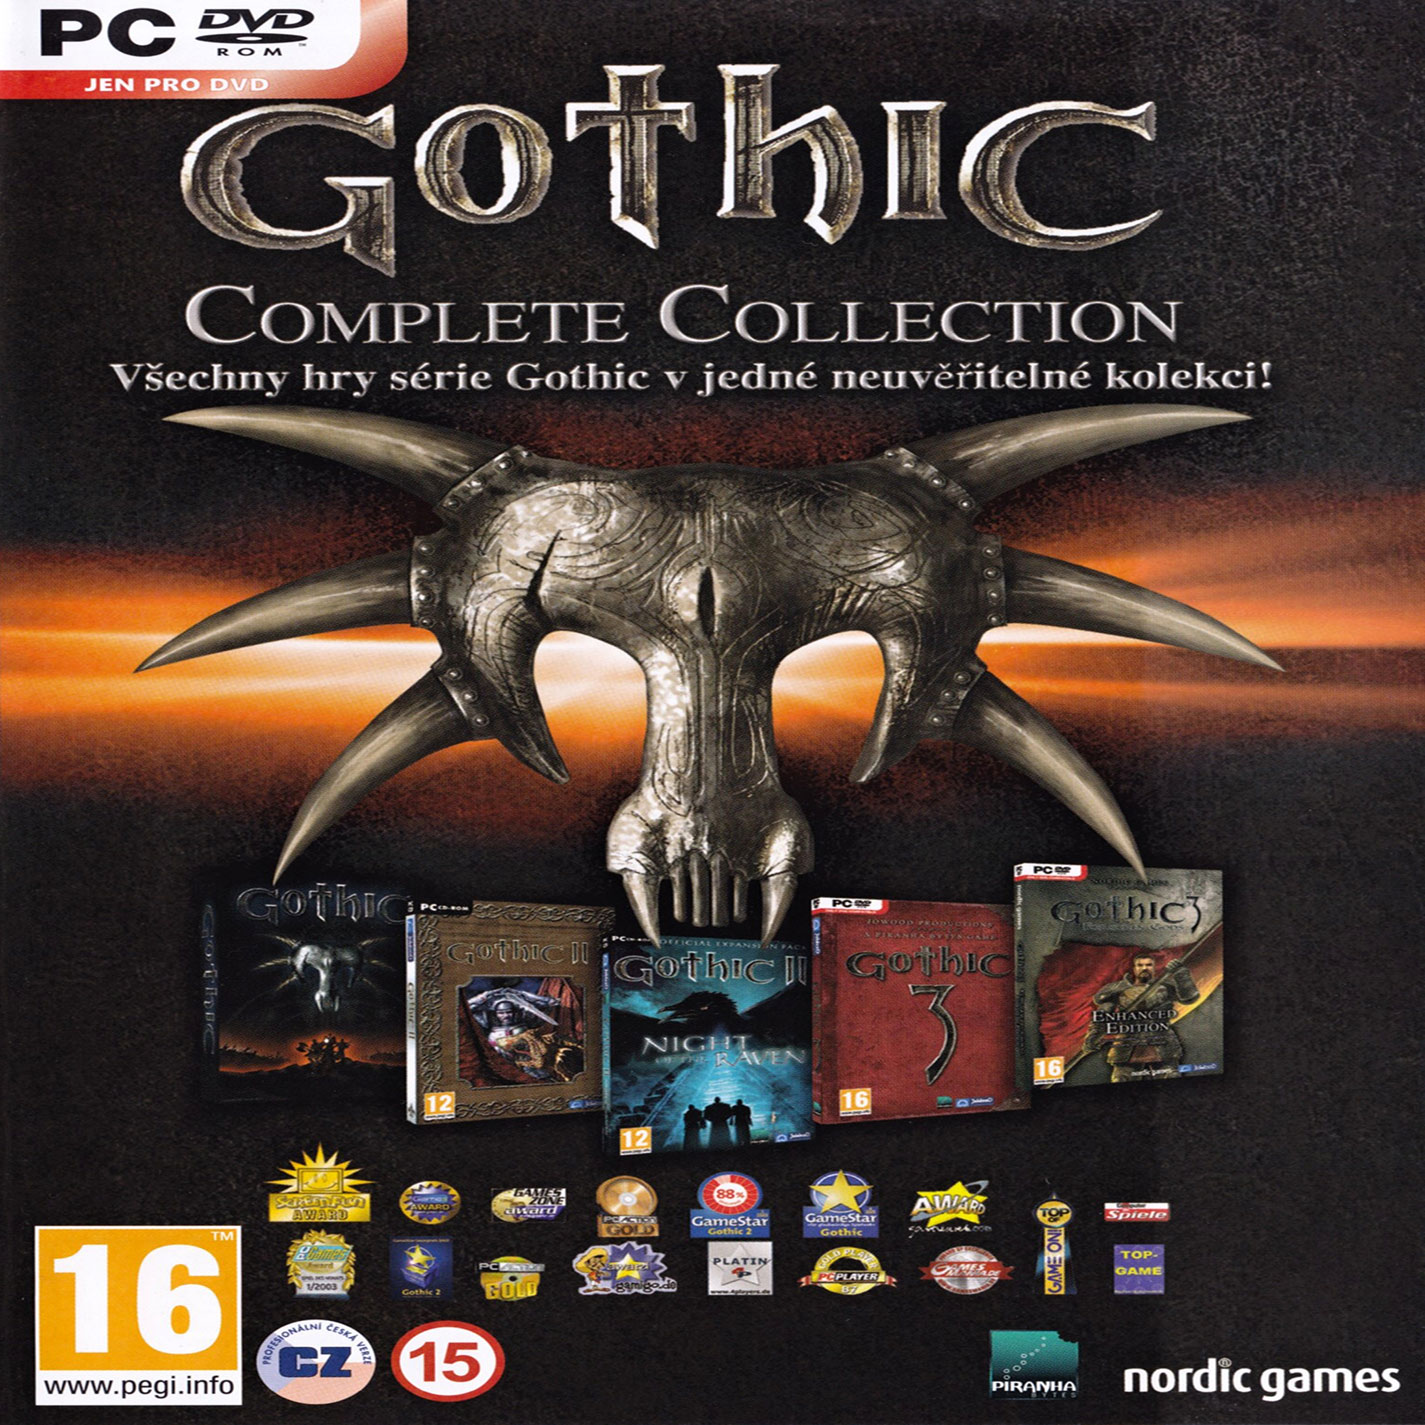 Gothic Complete Collection - pedn CD obal